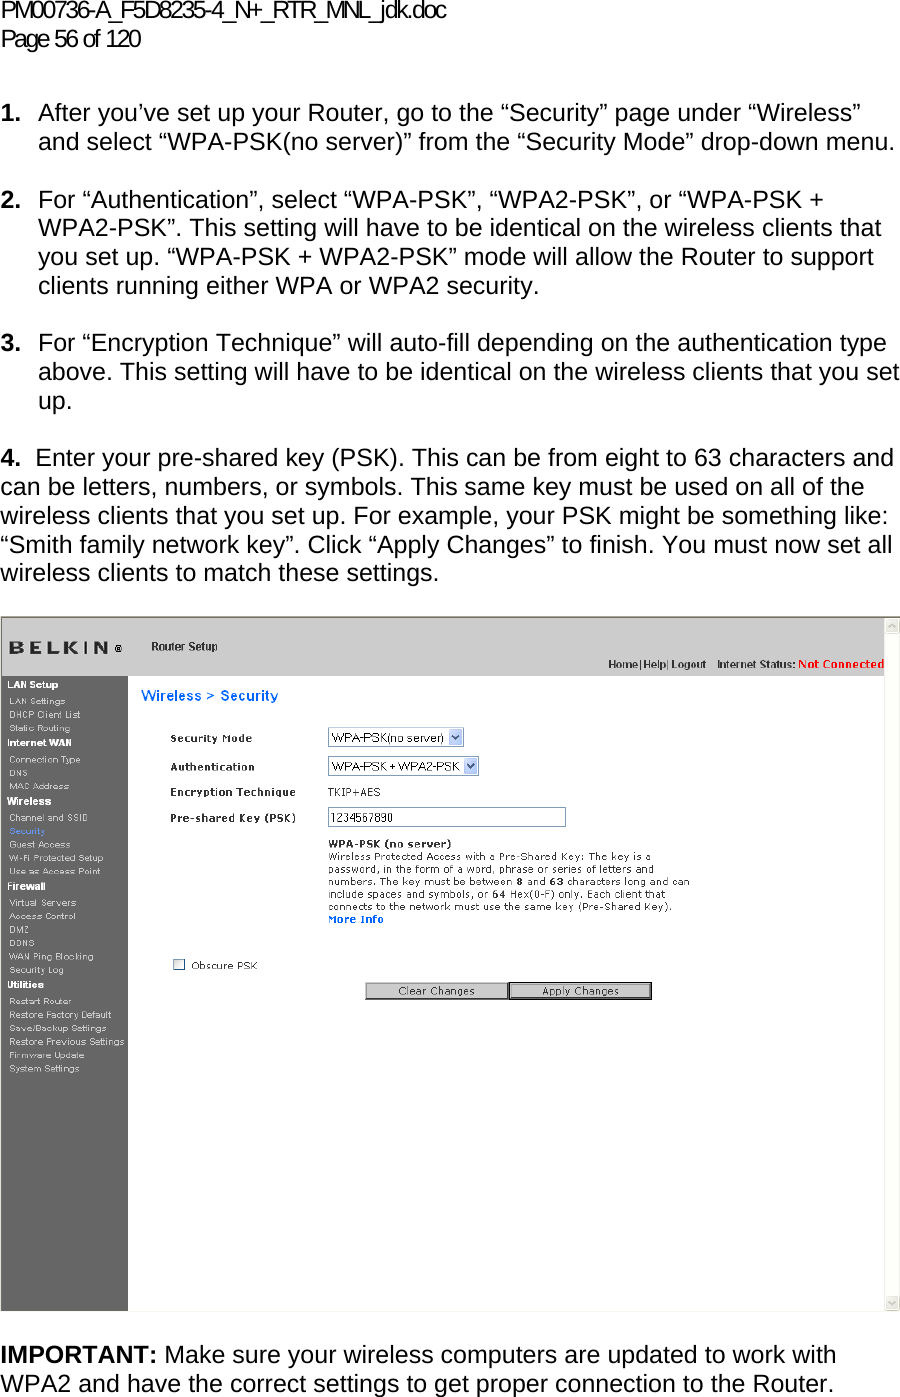 PM00736-A_F5D8235-4_N+_RTR_MNL_jdk.doc Page 56 of 120  1.  After you’ve set up your Router, go to the “Security” page under “Wireless” and select “WPA-PSK(no server)” from the “Security Mode” drop-down menu.   2.  For “Authentication”, select “WPA-PSK”, “WPA2-PSK”, or “WPA-PSK + WPA2-PSK”. This setting will have to be identical on the wireless clients that you set up. “WPA-PSK + WPA2-PSK” mode will allow the Router to support clients running either WPA or WPA2 security.  3.  For “Encryption Technique” will auto-fill depending on the authentication type above. This setting will have to be identical on the wireless clients that you set up.   4.  Enter your pre-shared key (PSK). This can be from eight to 63 characters and can be letters, numbers, or symbols. This same key must be used on all of the wireless clients that you set up. For example, your PSK might be something like: “Smith family network key”. Click “Apply Changes” to finish. You must now set all wireless clients to match these settings.    IMPORTANT: Make sure your wireless computers are updated to work with WPA2 and have the correct settings to get proper connection to the Router. 